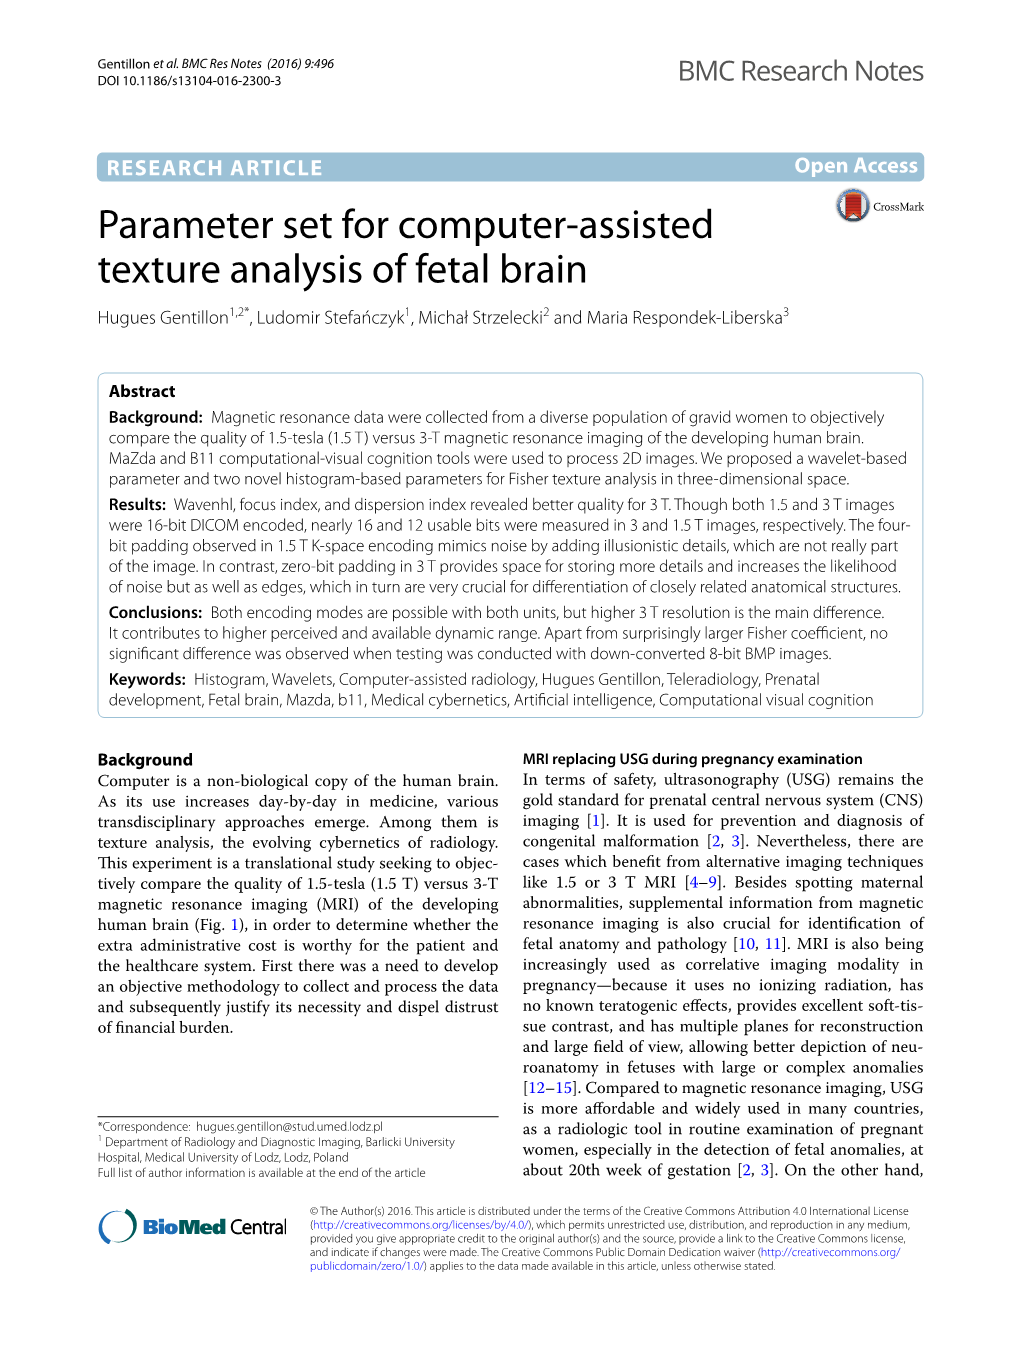 Parameter Set for Computer-Assisted Texture Analysis of Fetal Brain